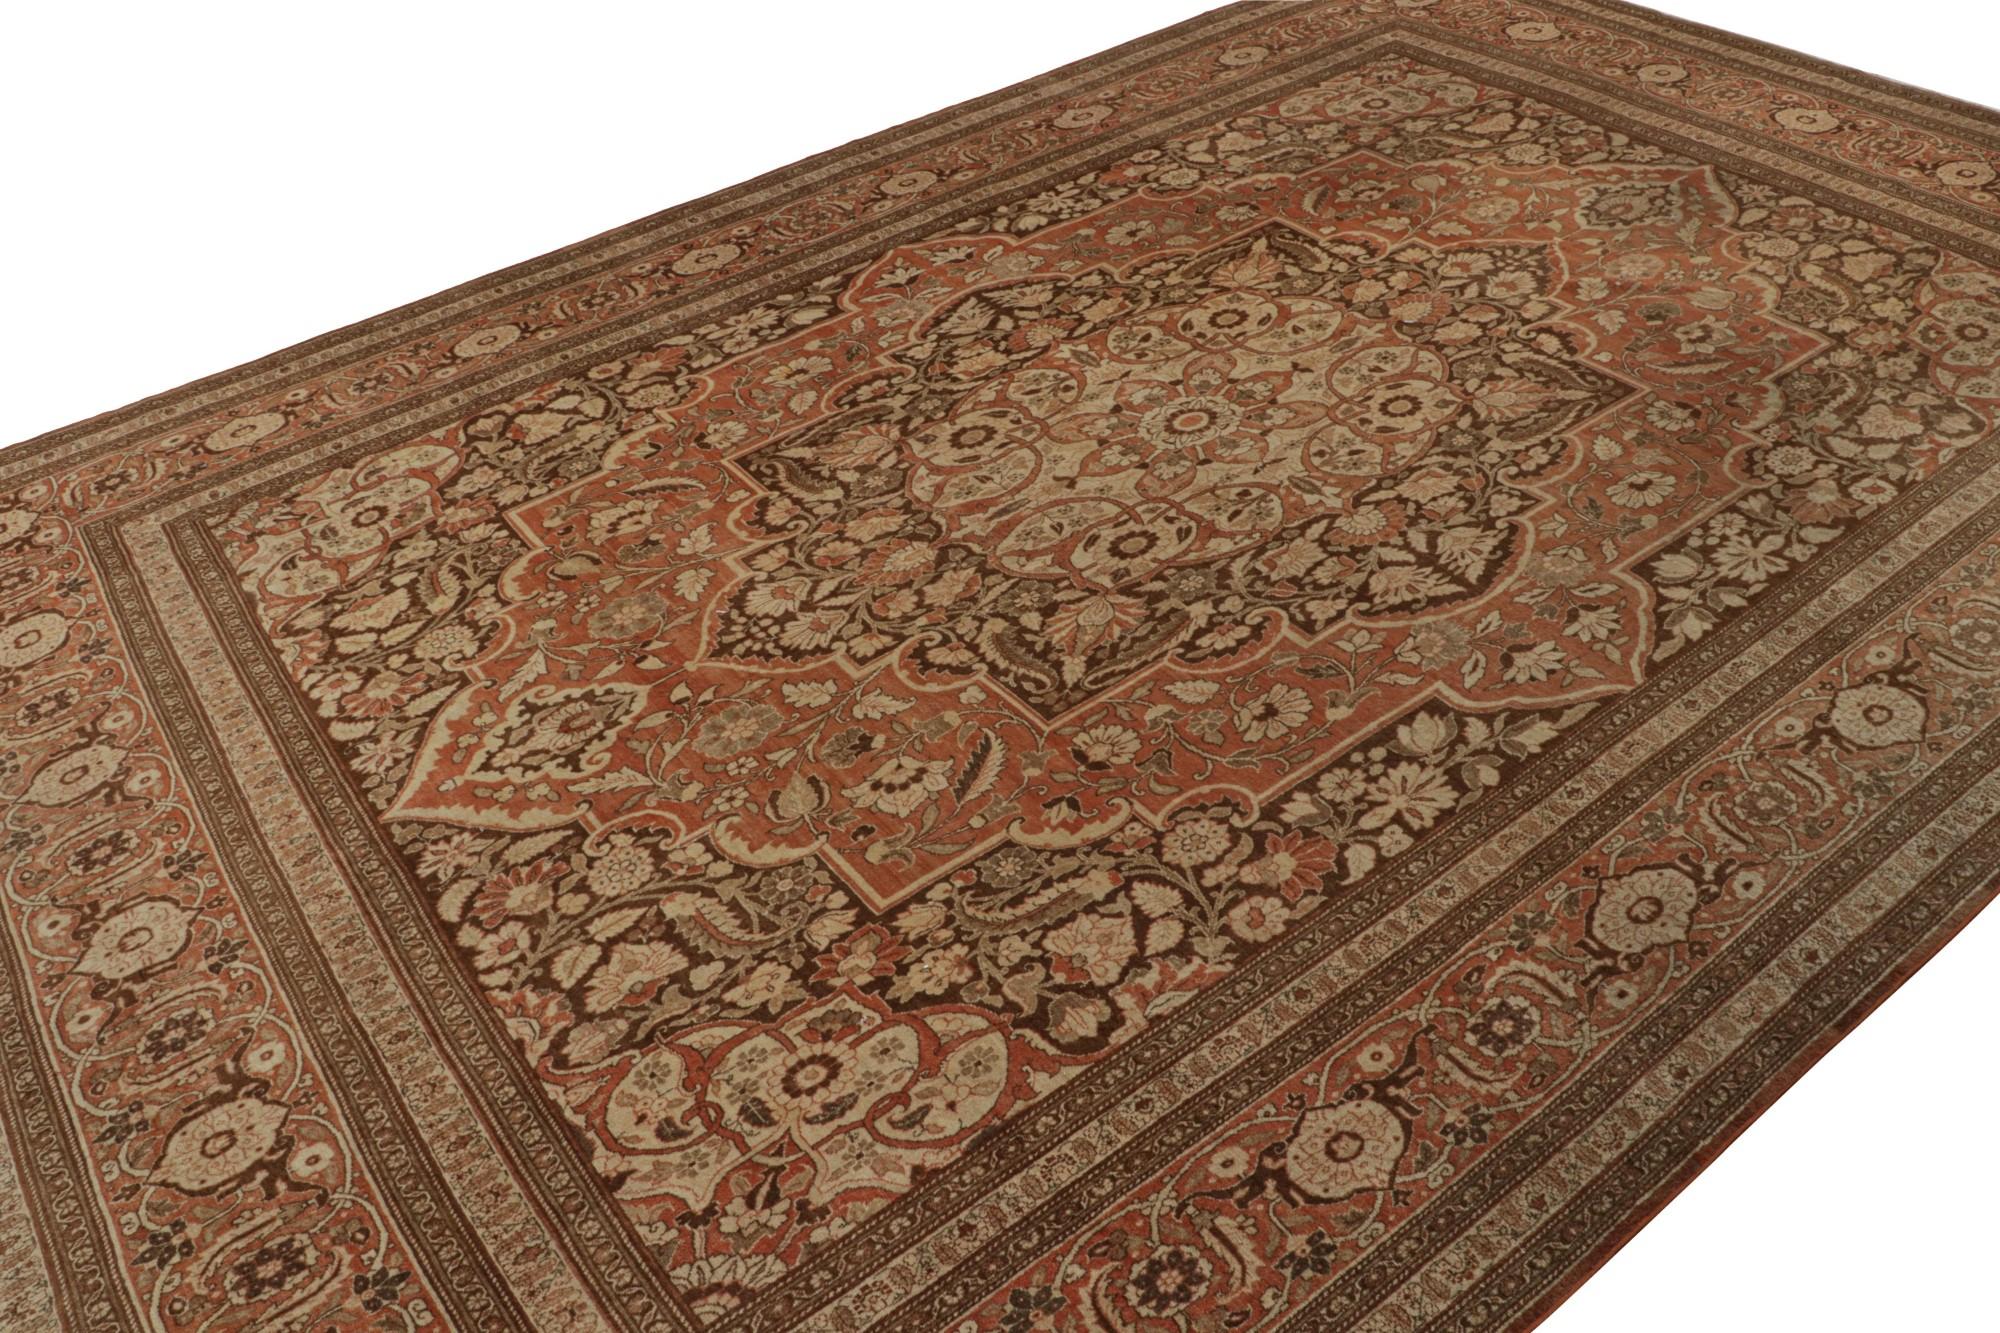 Hand-knotted in wool, circa 1890-1900, this 10x16 antique Persian Tabriz rug, has finely detailed floral patterns in beige, brown and red. 

On the Design: 

Rich, sophisticated and complementary—rare combination of a masterpiece for its period of